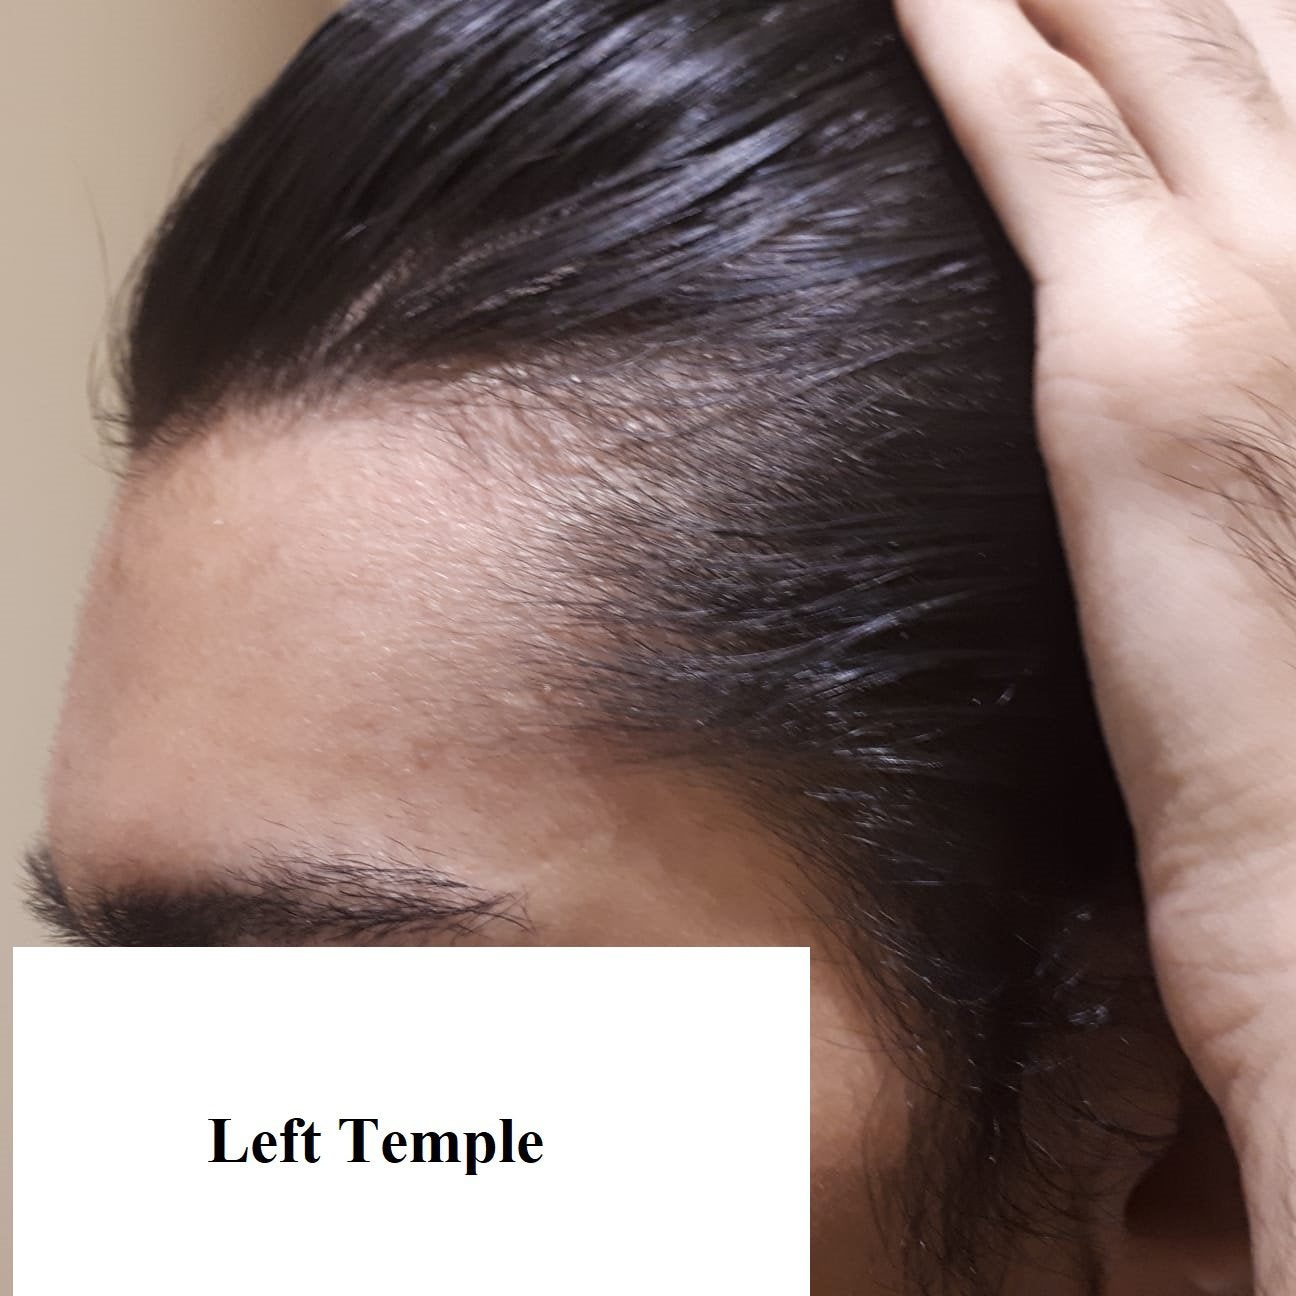 Are my temples thinning? : HaircareScience